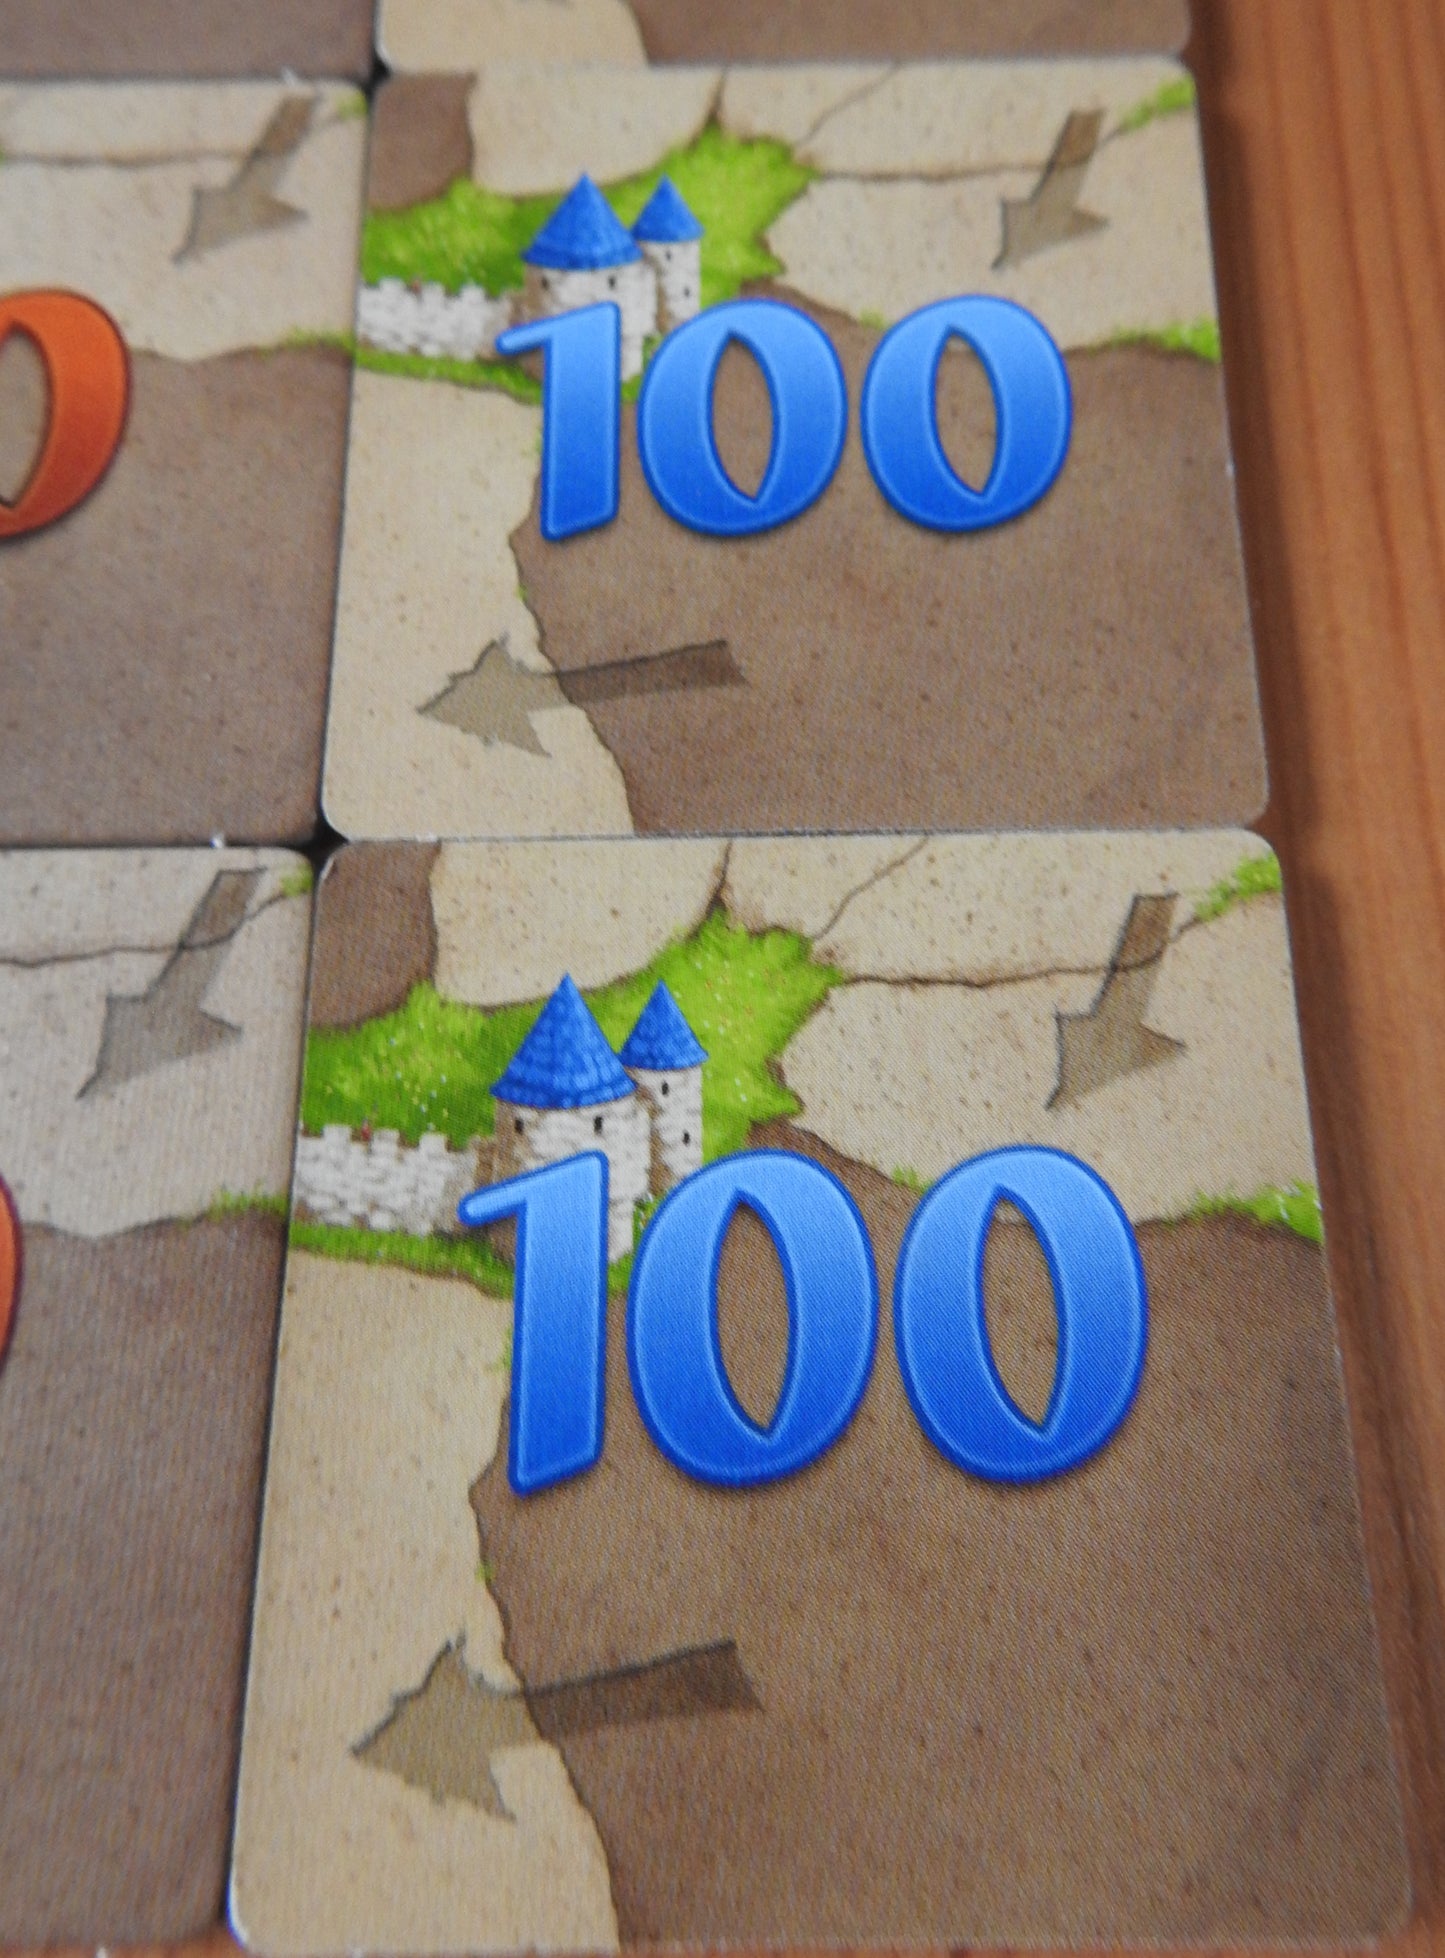 A close-up of some of the '100' tiles that come with this 6 Extra Scoring Tiles accessory for Carcassonne.